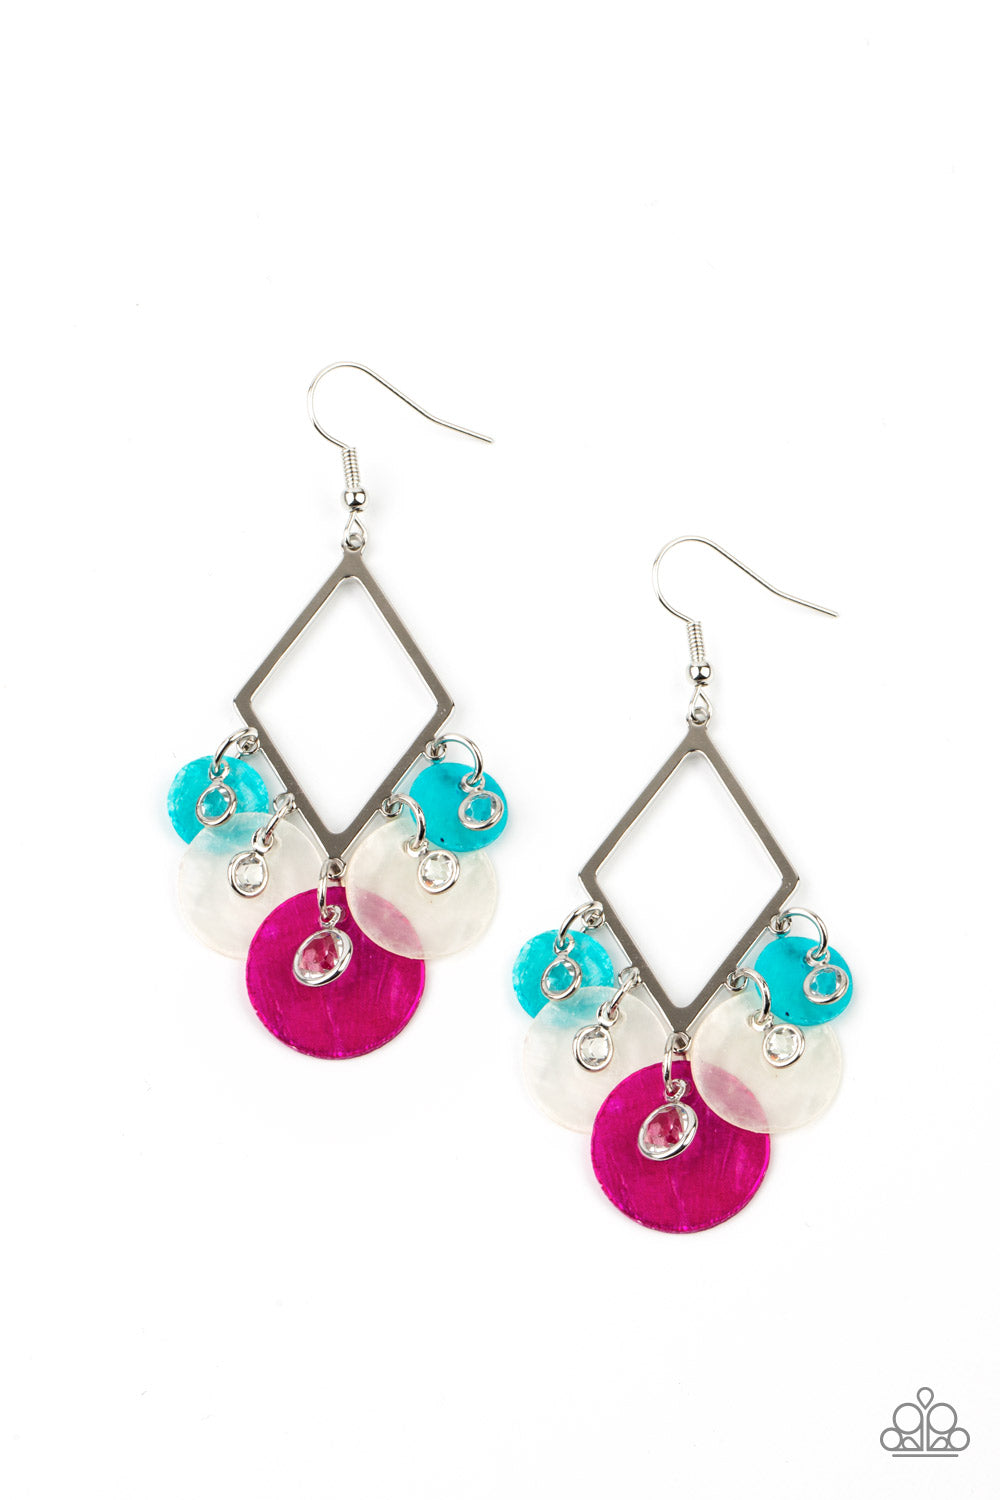 Paparazzi Pomp And Circumstance - Multi Earrings - A Finishing Touch Jewelry